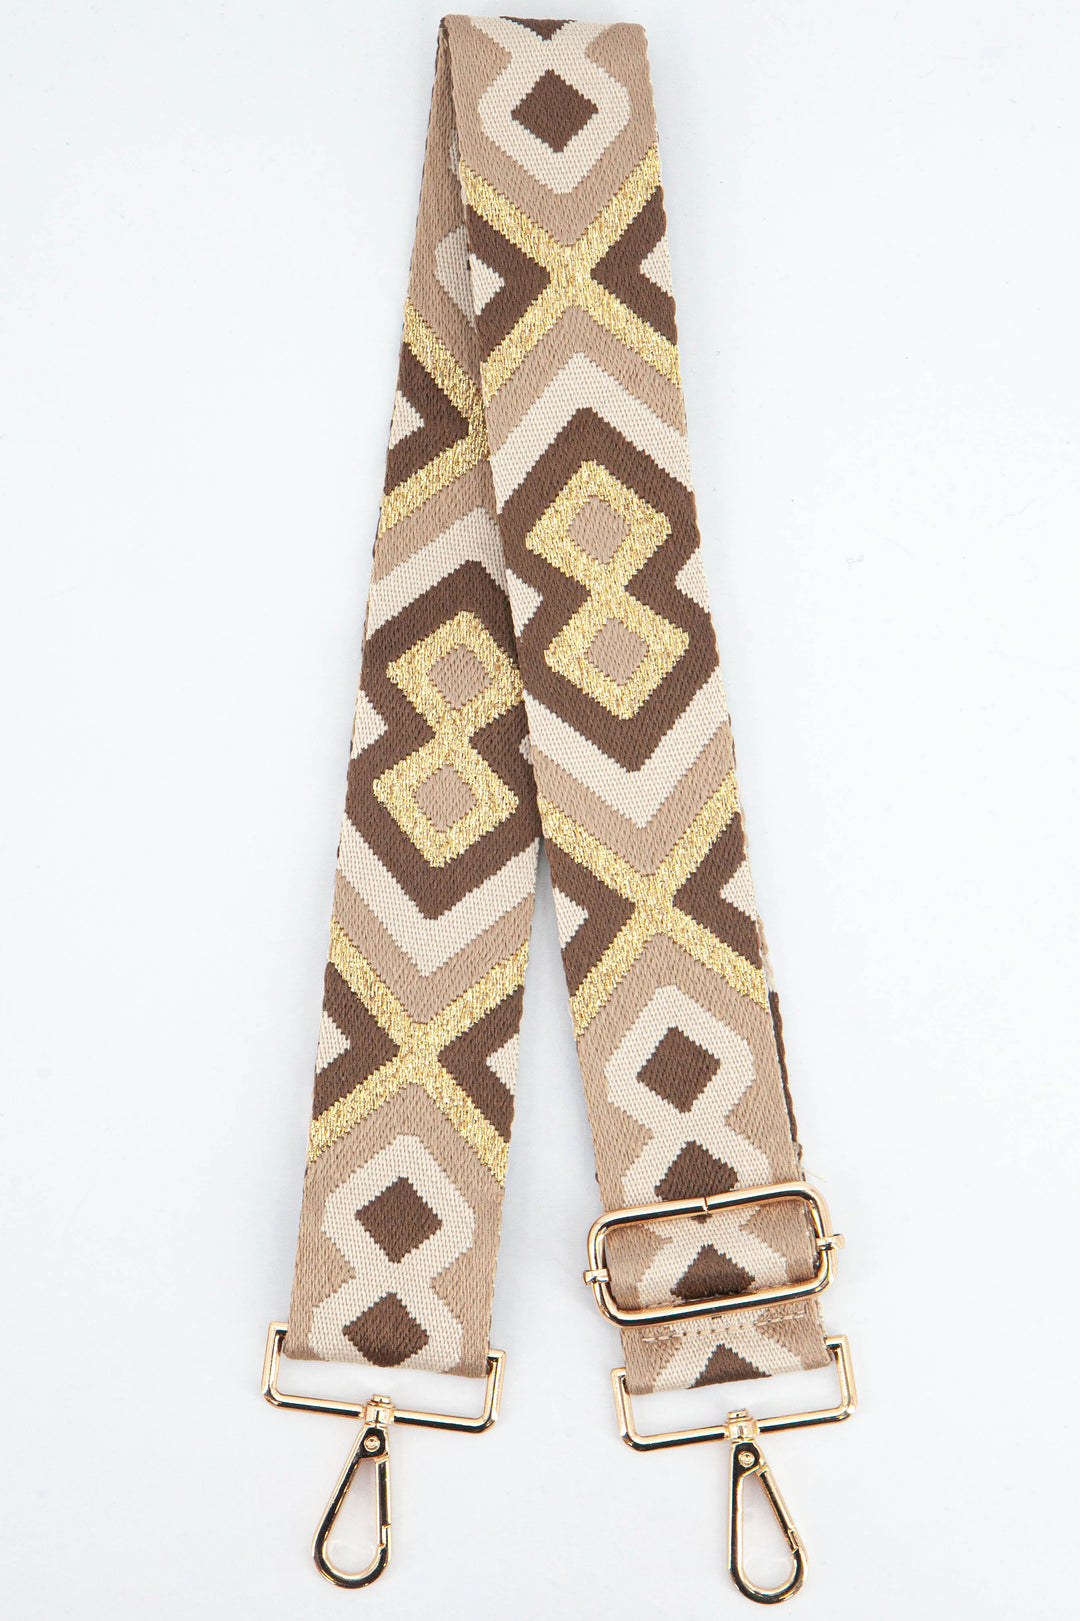 wide woven bag strap with sand beige and neutral brown aztec print with gold metallic glitter threading throughout